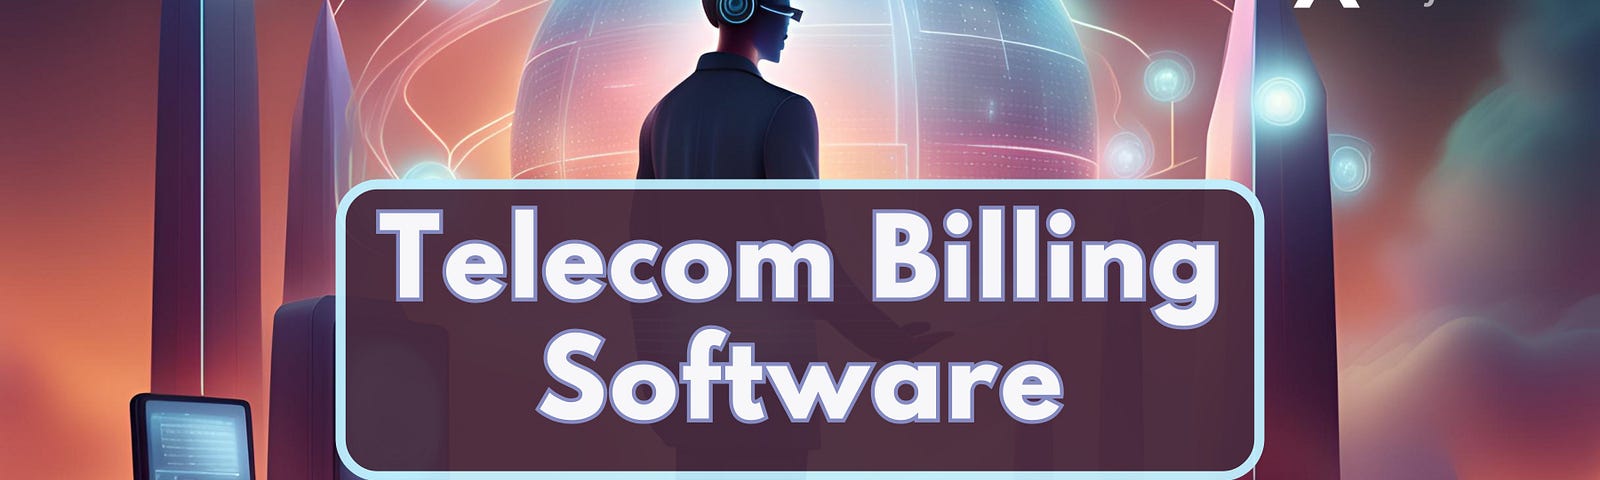 A futuristic image symbolizing digital transformation, featuring elements related to telecommunications, billing software, and automation. The center of the image features the theme of the title, stating “Telecom Billing Software” in white lettering outlined in light purple using bold soft edge lettering, overlaid on a dark circular rectangle, mildly transparent, which is outlined in the same light purple. The Alternative Payments logo, in white and grey lettering in the top right corner.